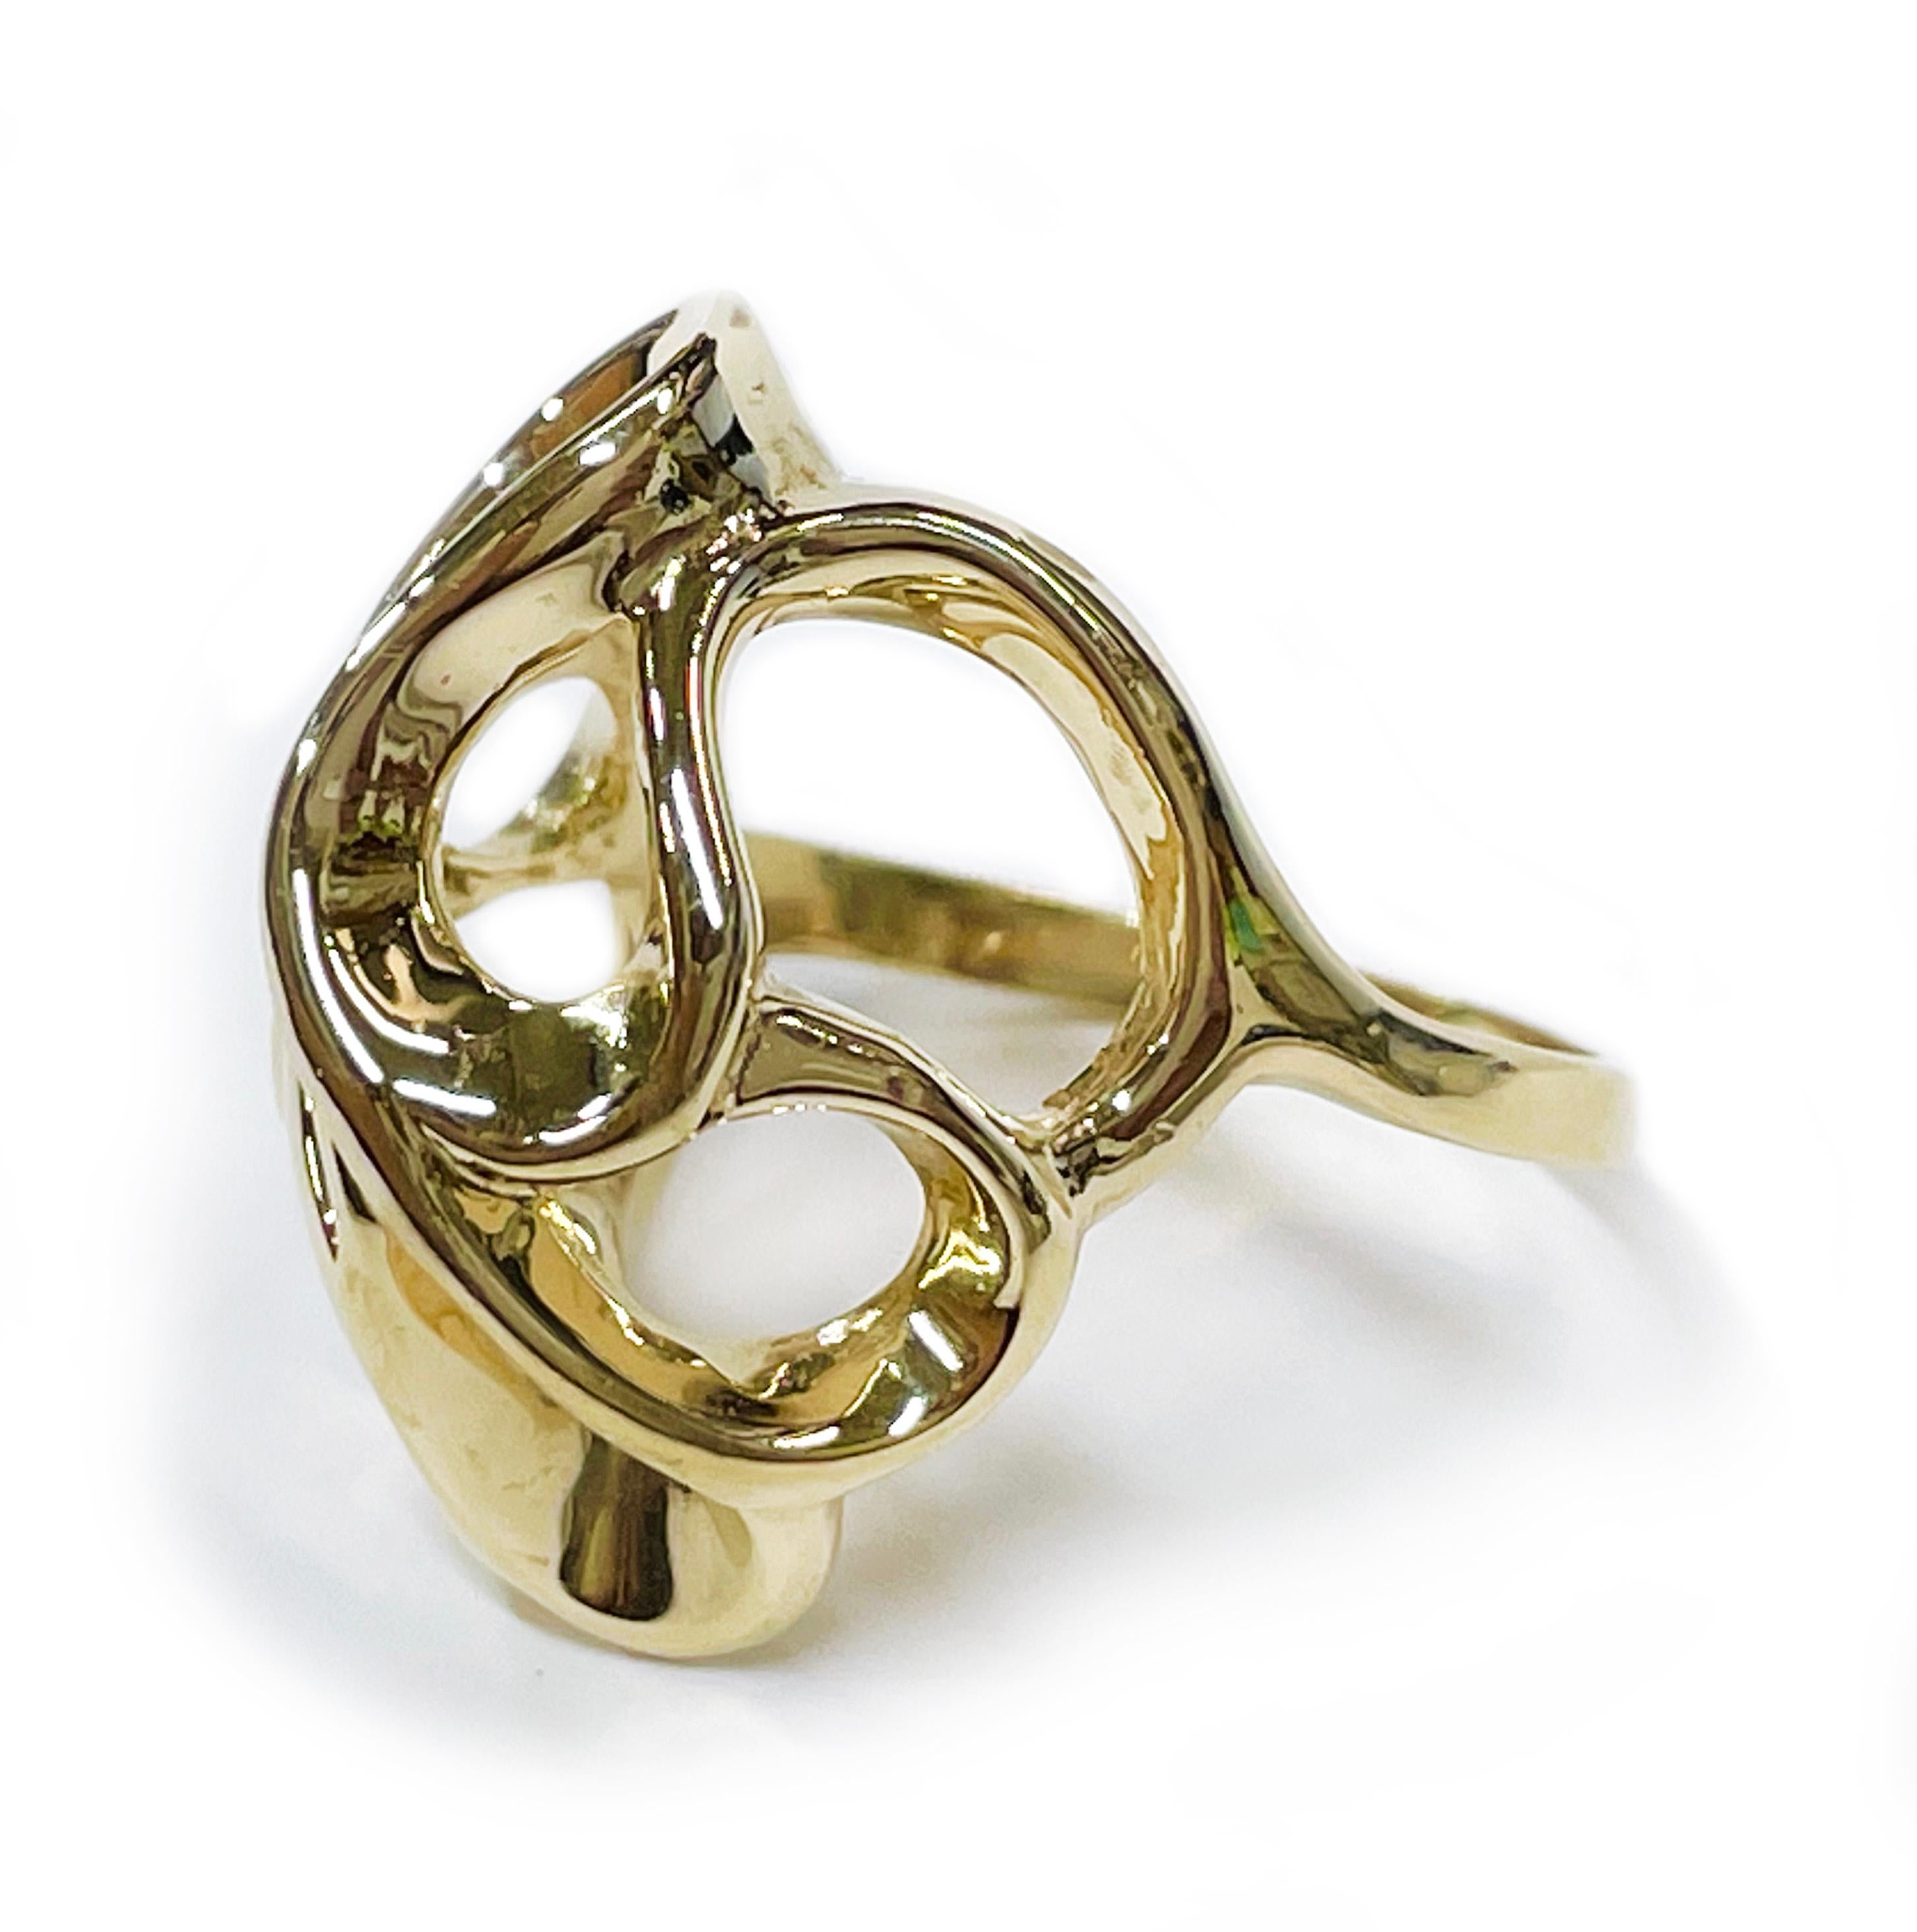 14 Karat Yellow Gold Free Form Ribbon Ring. This ring features ribbons of gold creating free form swirls in a dome shape. Stamped on the inside of the band is 14K. The ring size is 8. The ring has a total weight of 10.1 grams. 